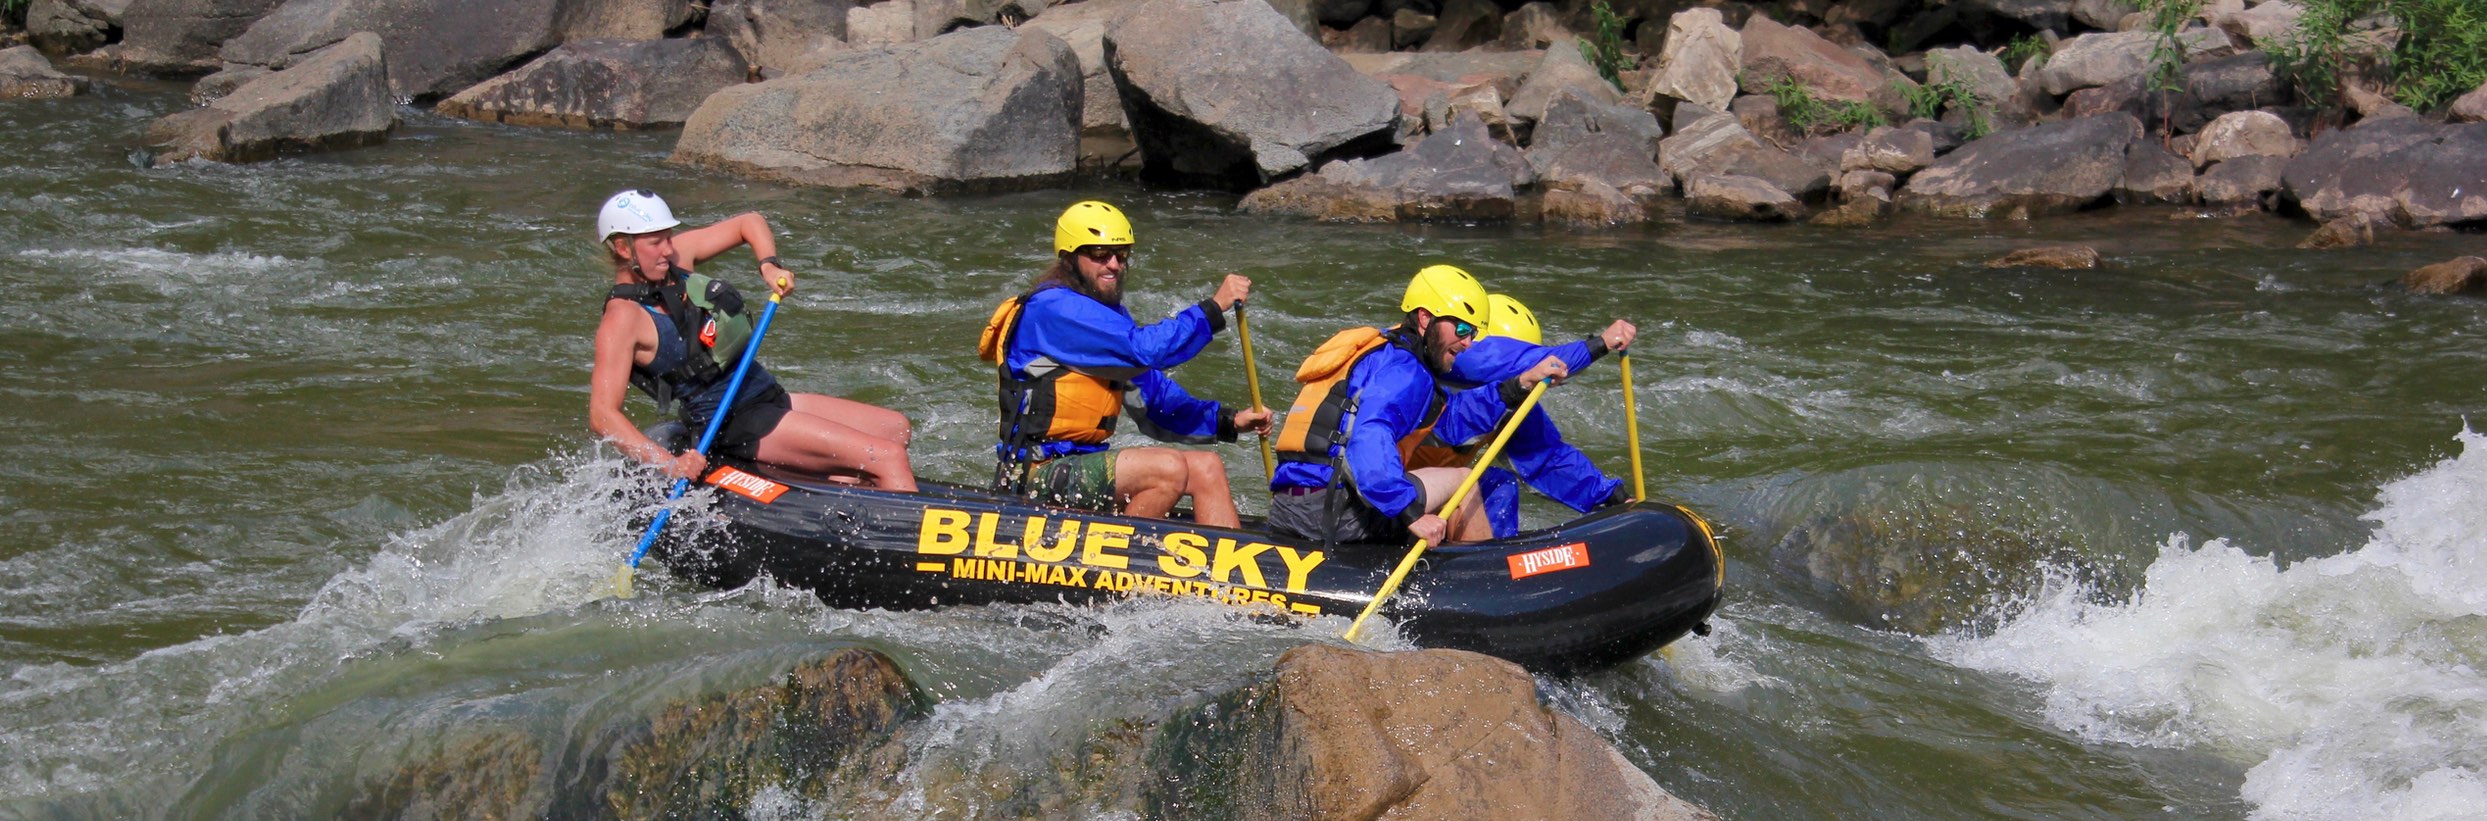 In this captivating image, three individuals, guided by their expert leader, skillfully navigate a Mini Max through the exhilarating Class III waters. As they paddle around a prominent rock situated in the midst of the scene, the photo encapsulates the thrill and teamwork involved in conquering challenging river rapids.